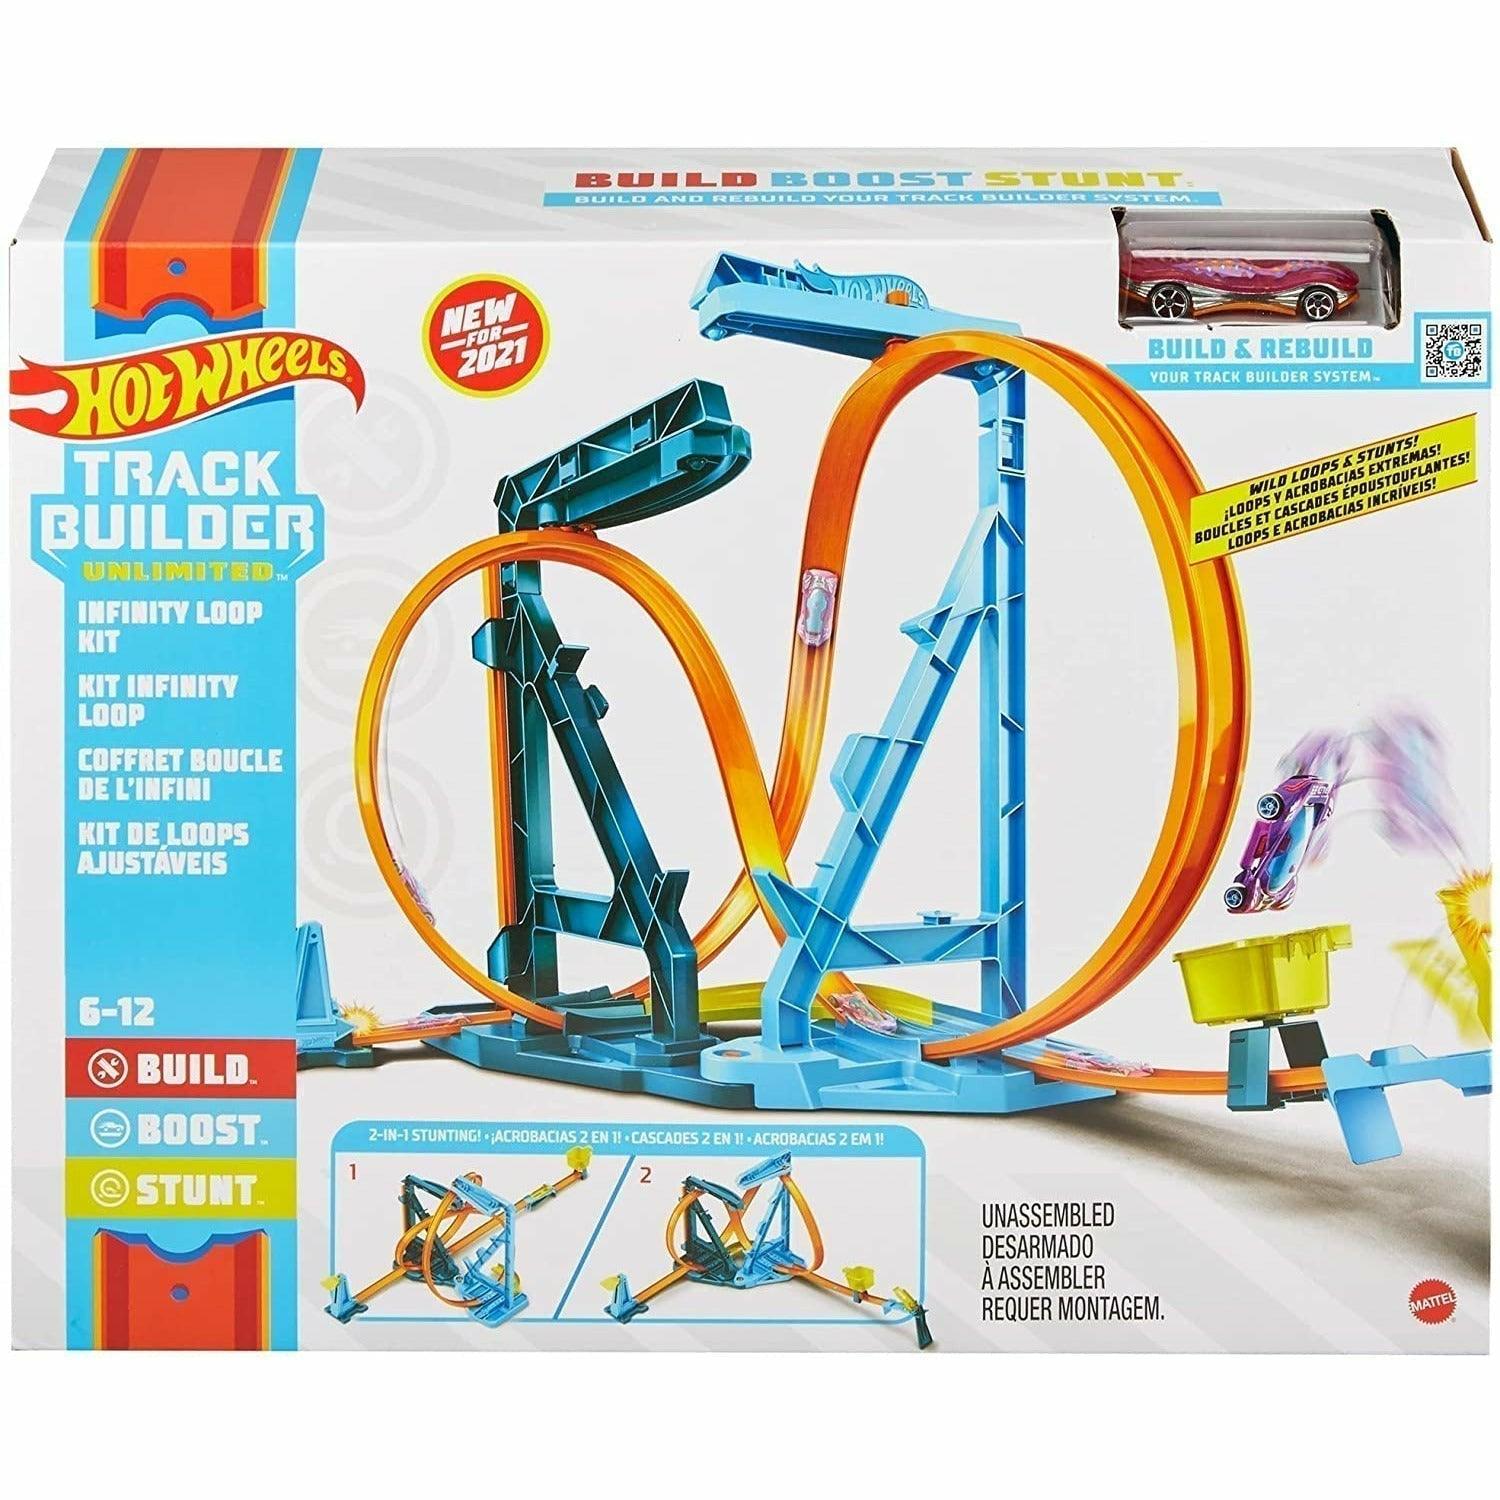 Hot Wheels Track Builder Unlimited Infinity Loop Kit with Adjustable Set-Ups & Jump That Flips Cars into Catch Cup with One 1:64 Scale Vehicle - BumbleToys - 6+ Years, 8-13 Years, Boys, Pre-Order, Tracks & Garages